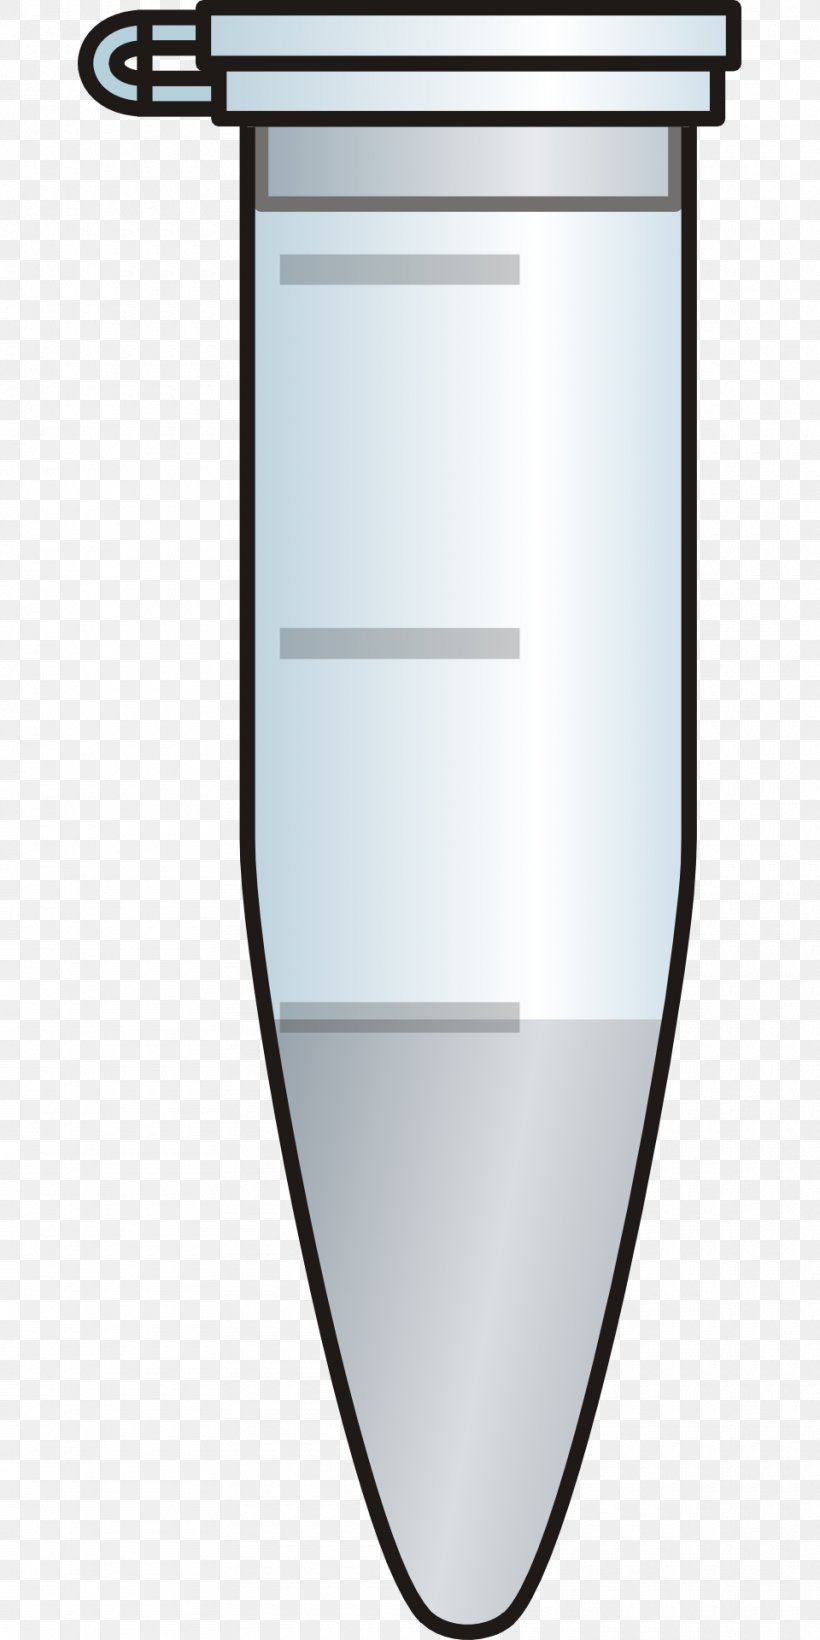 Eppendorf Clip Art, PNG, 960x1920px, Eppendorf, Openoffice, Pipette, Test Tubes Download Free